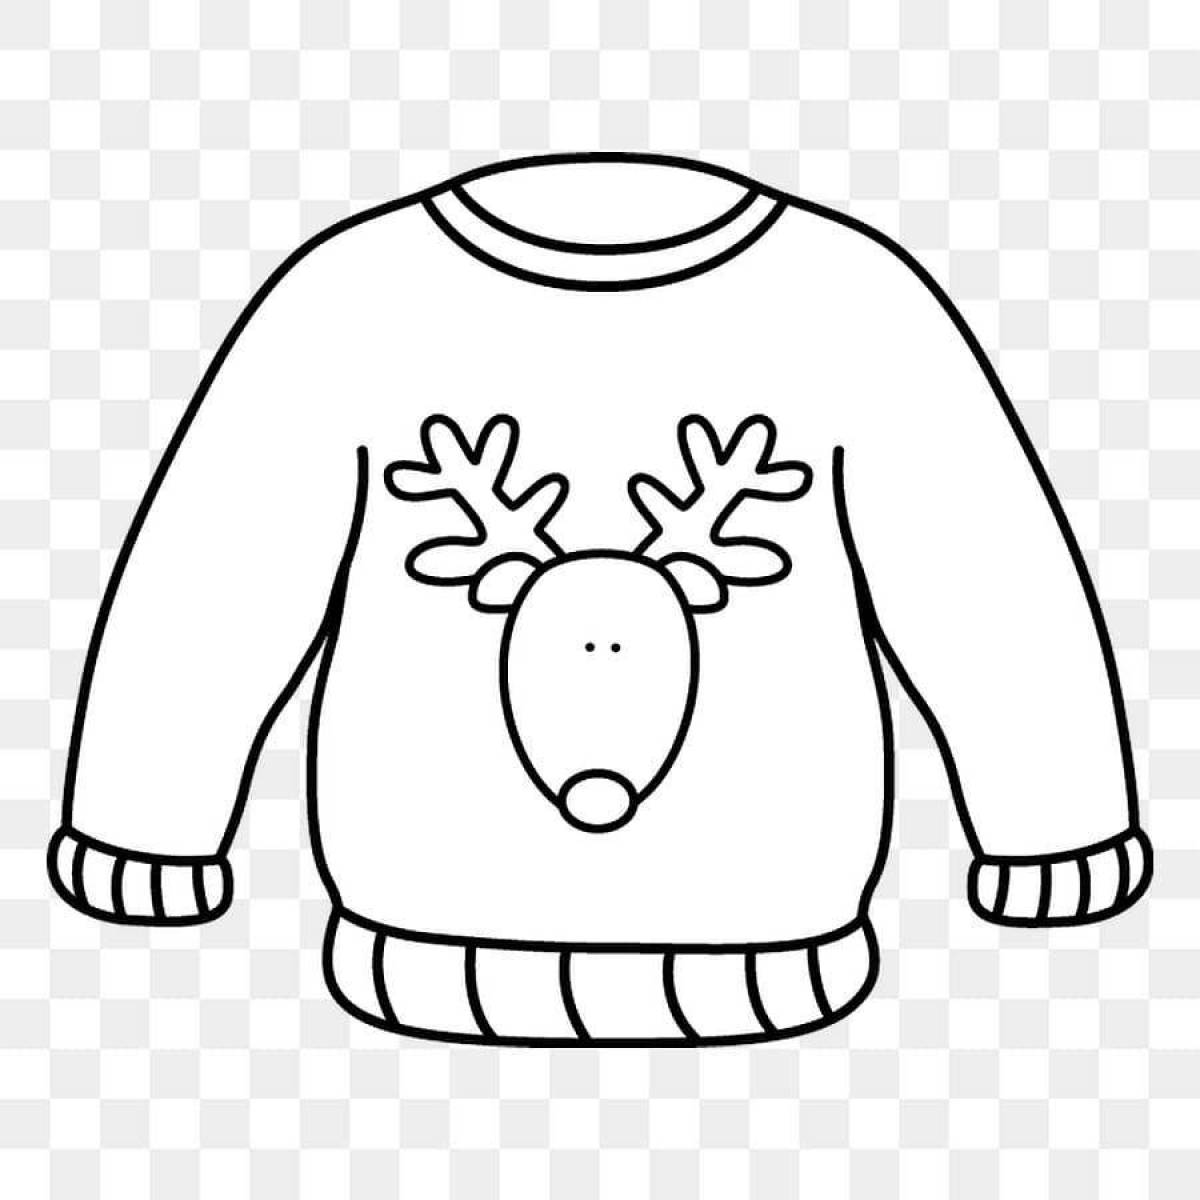 Amazing sweater coloring page for kids